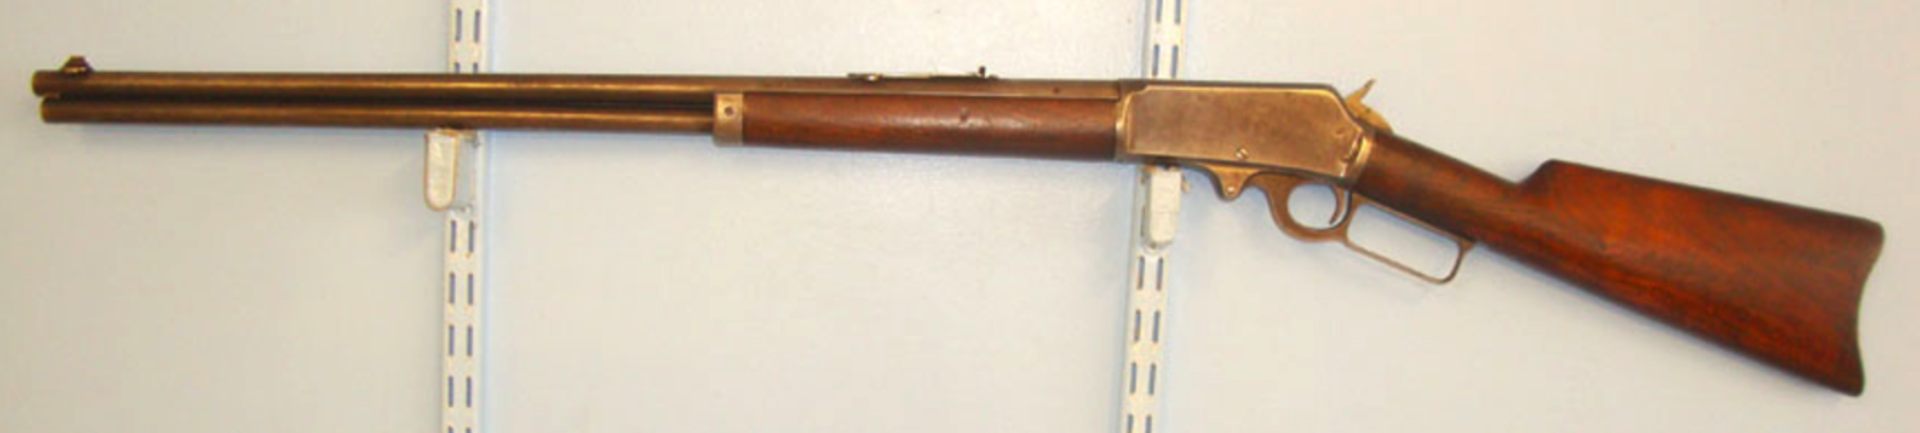 Marlin Safety Model 1893 .32-40 Obsolete Calibre Lever Action Rifle With Tube Magazine.